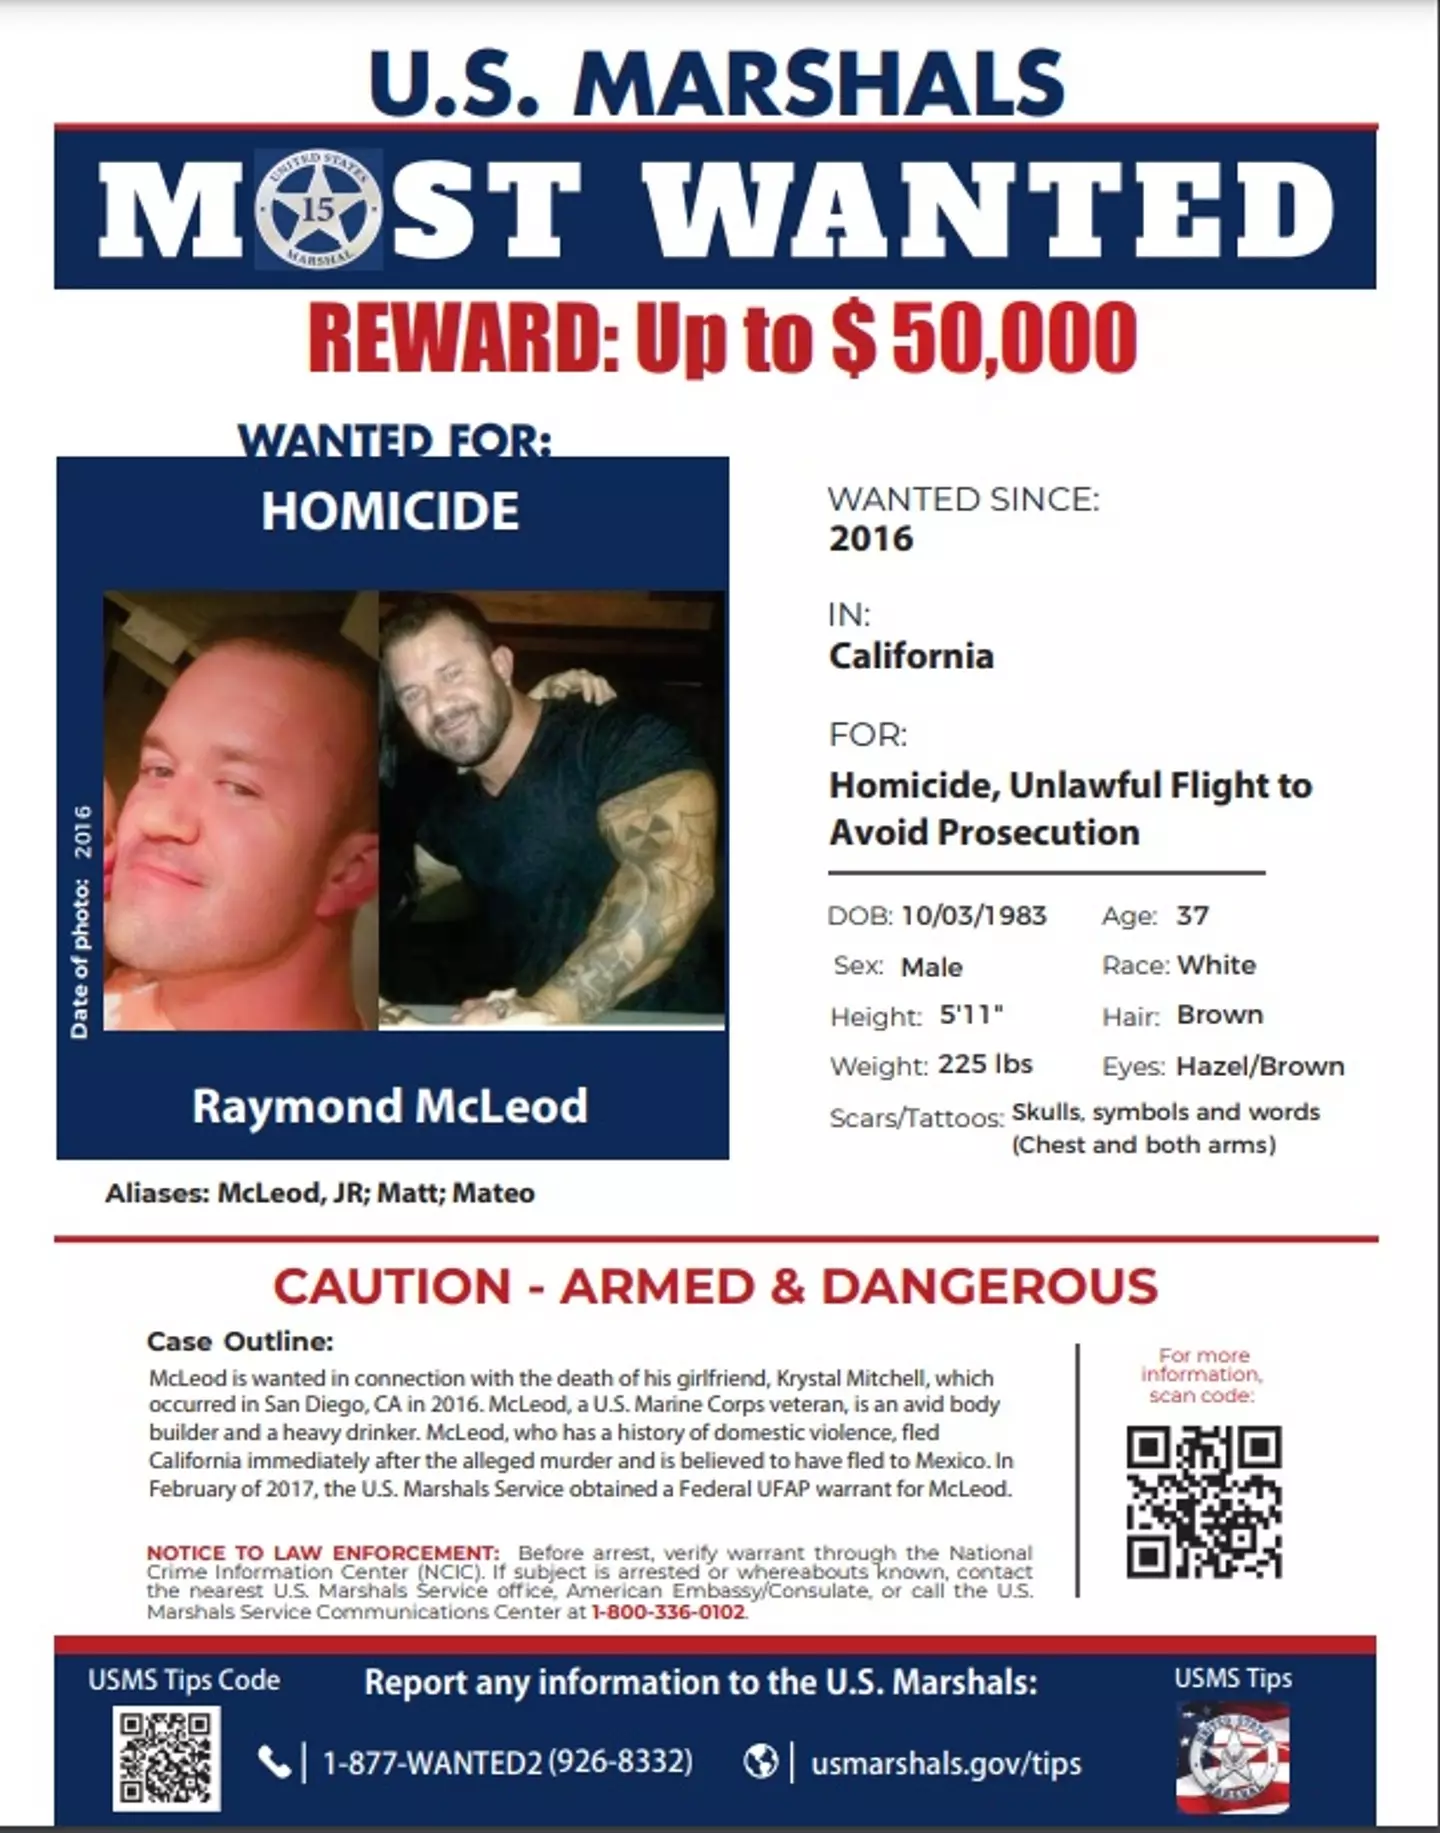 Raymond McLeod's wanted poster.